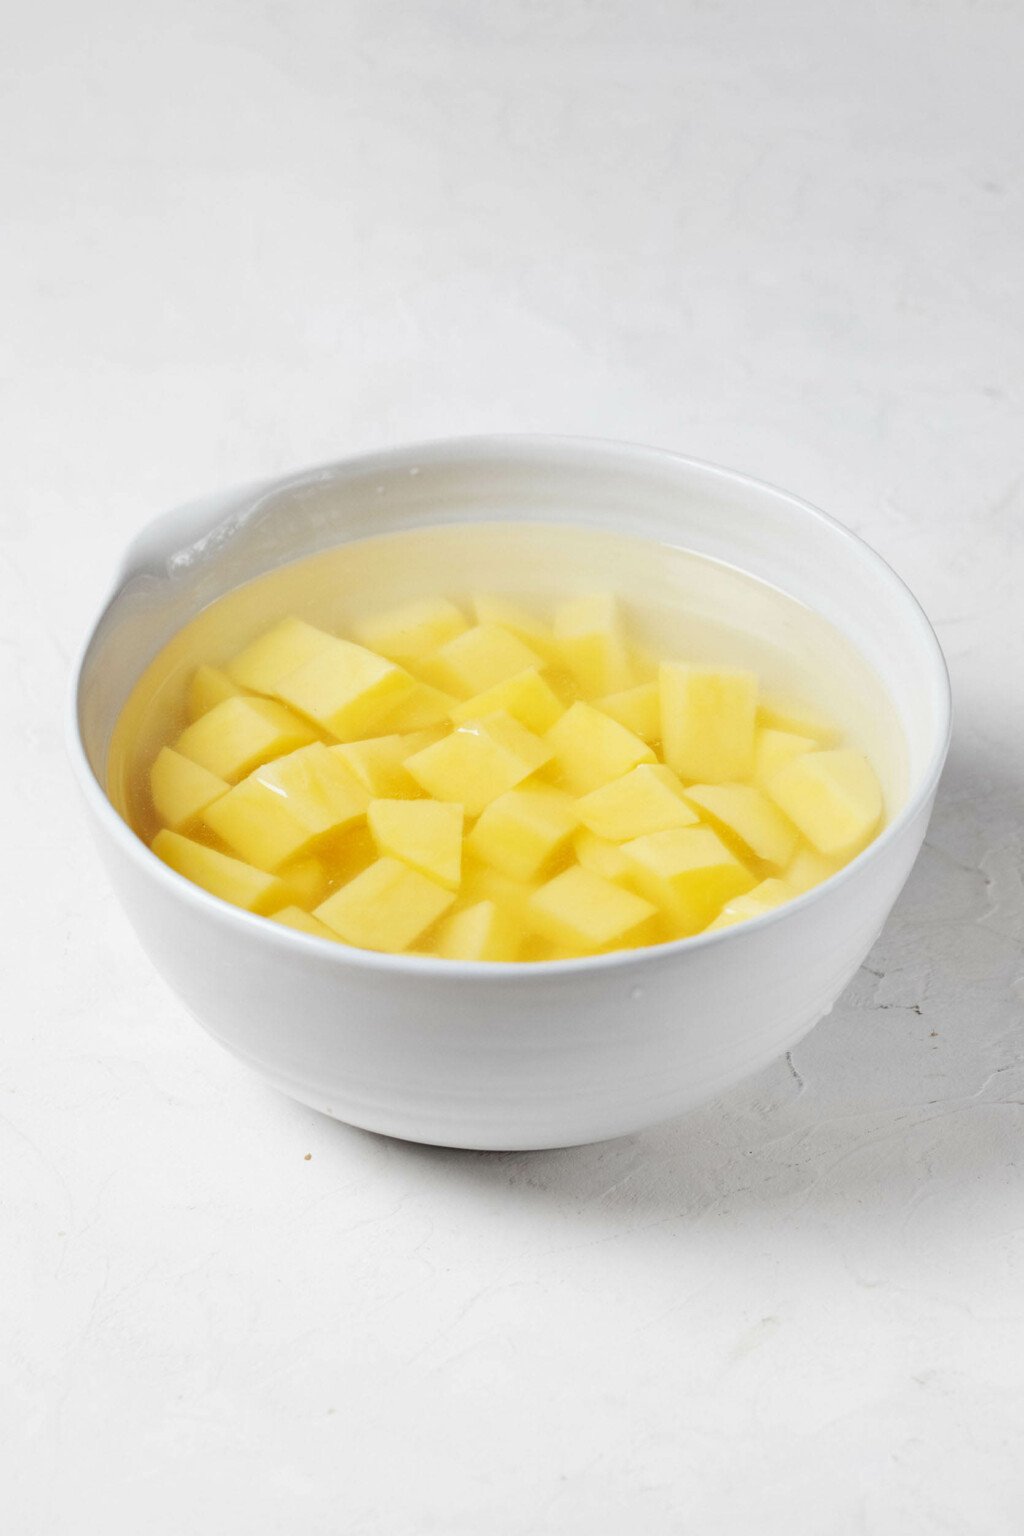 A large white mixing bowl is filled with water. It's being used to soak cubed potatoes.